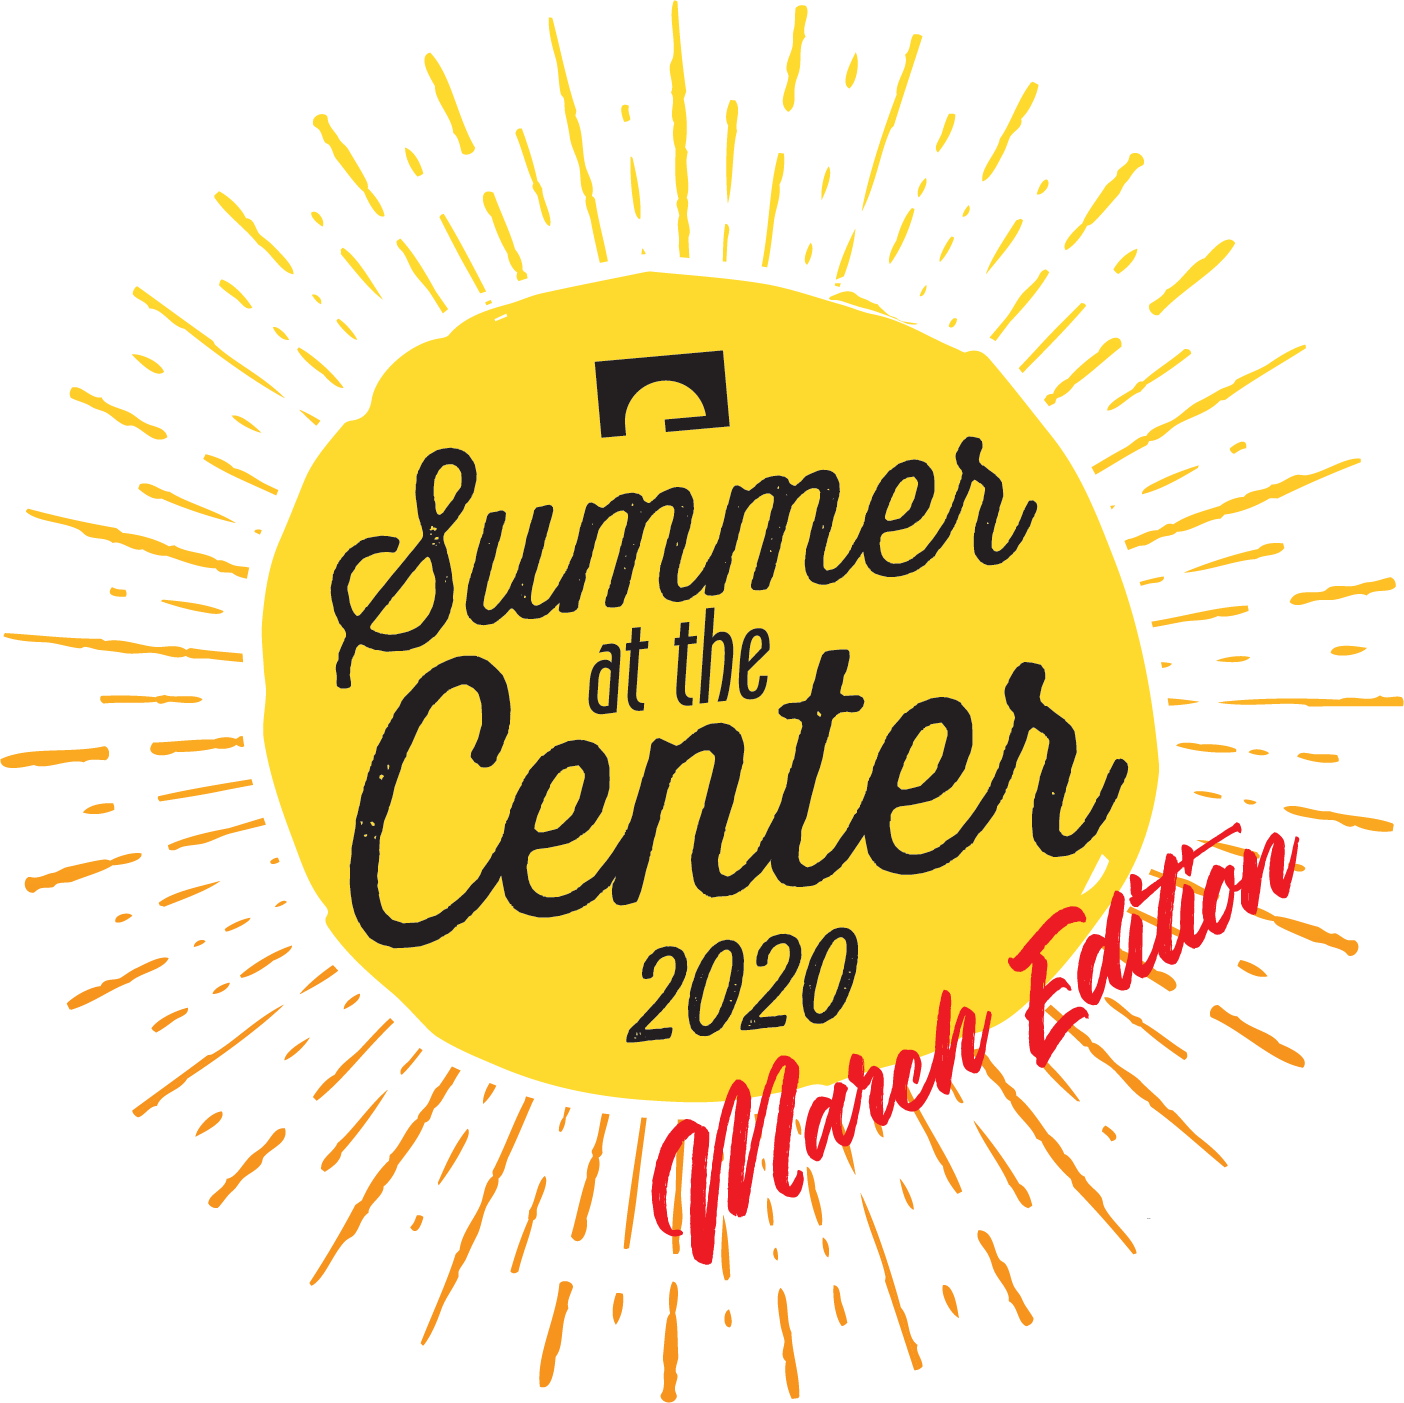 Summer at the Center 2020 - March Edition